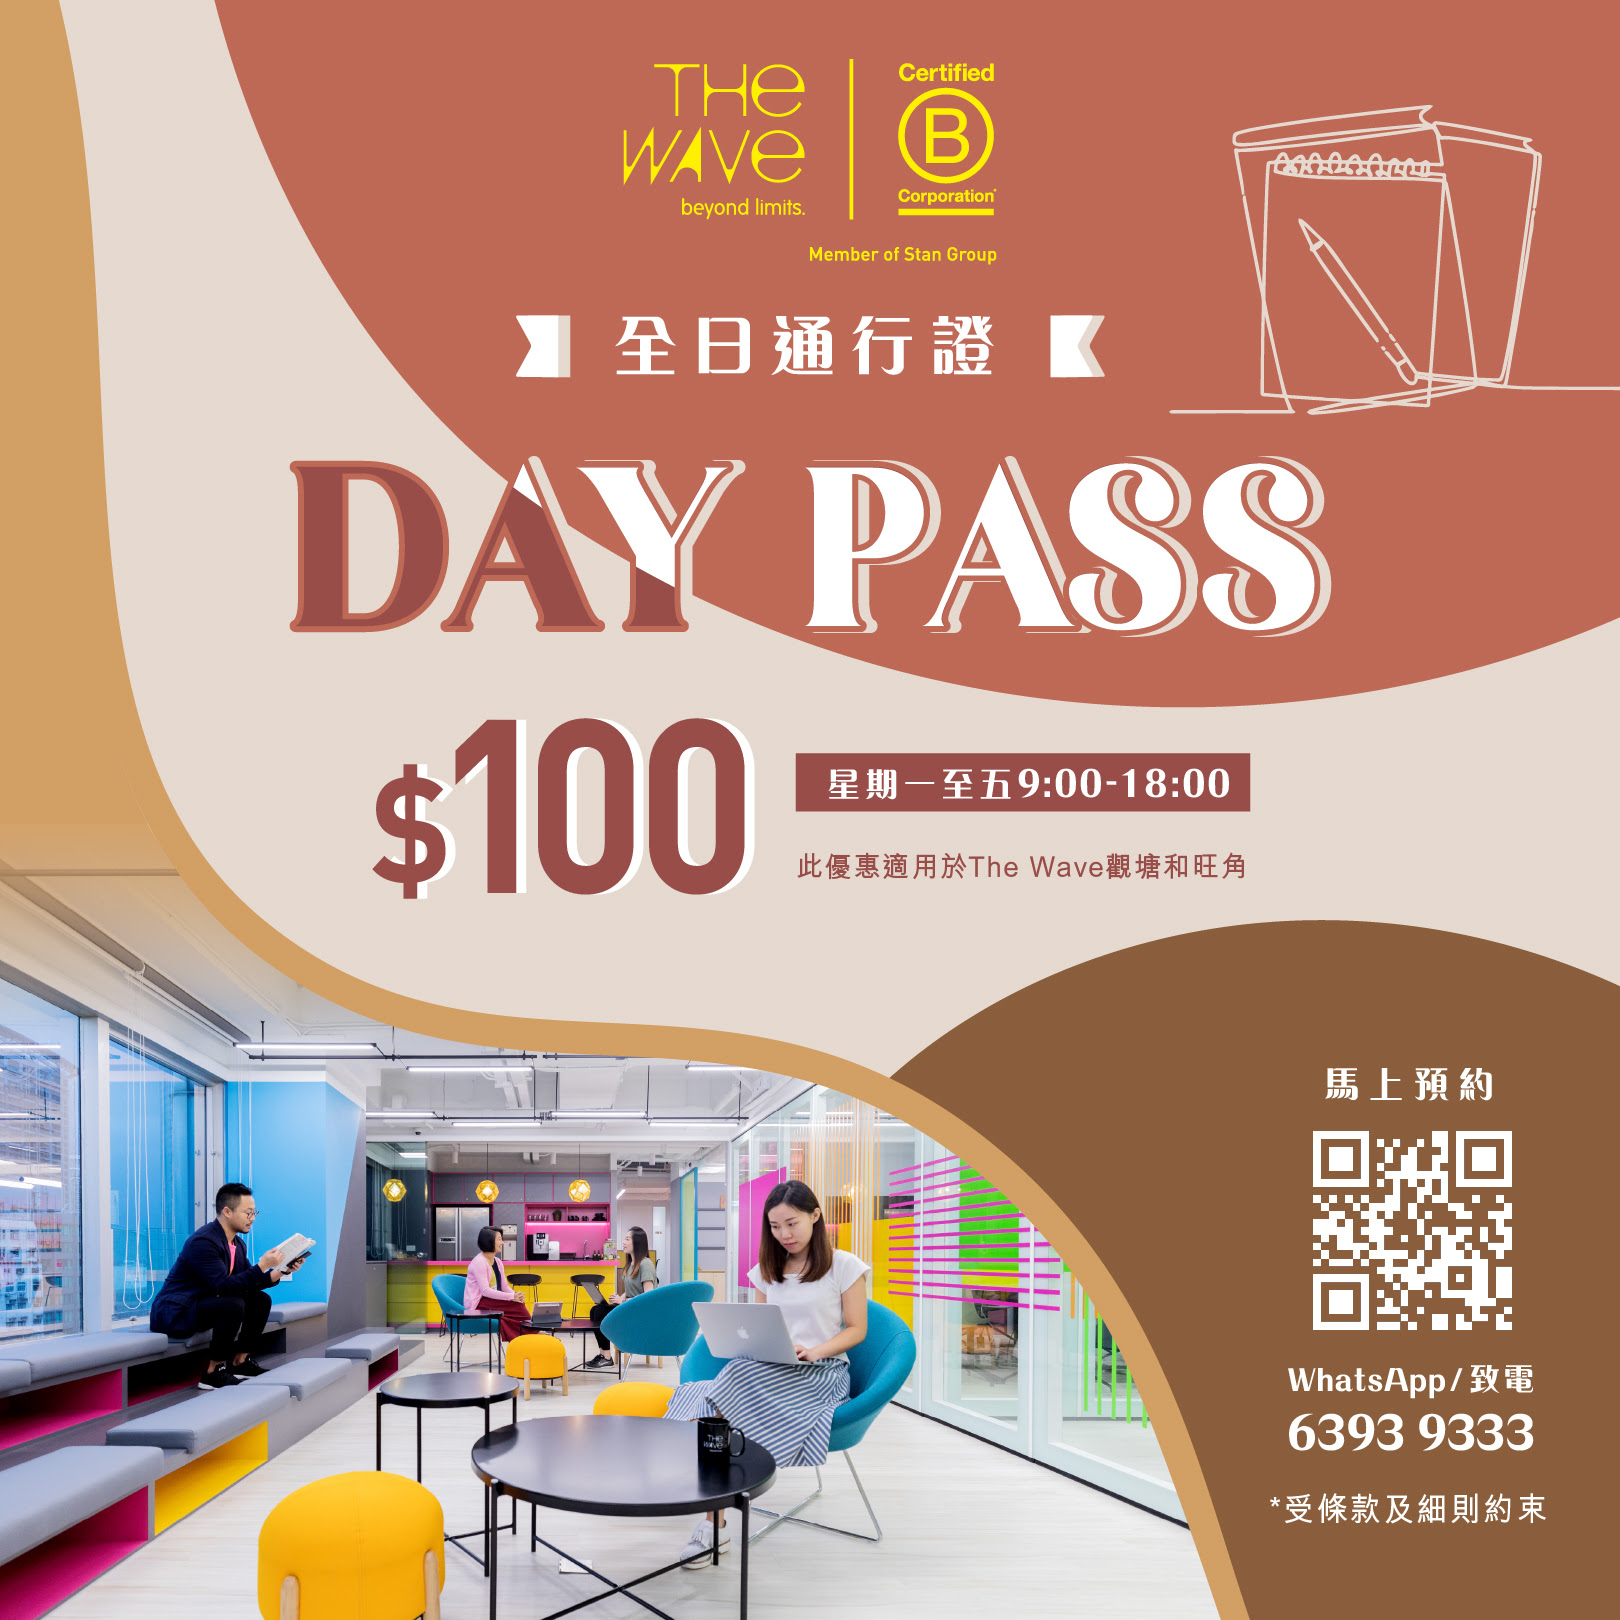 The Wave - Day Pass